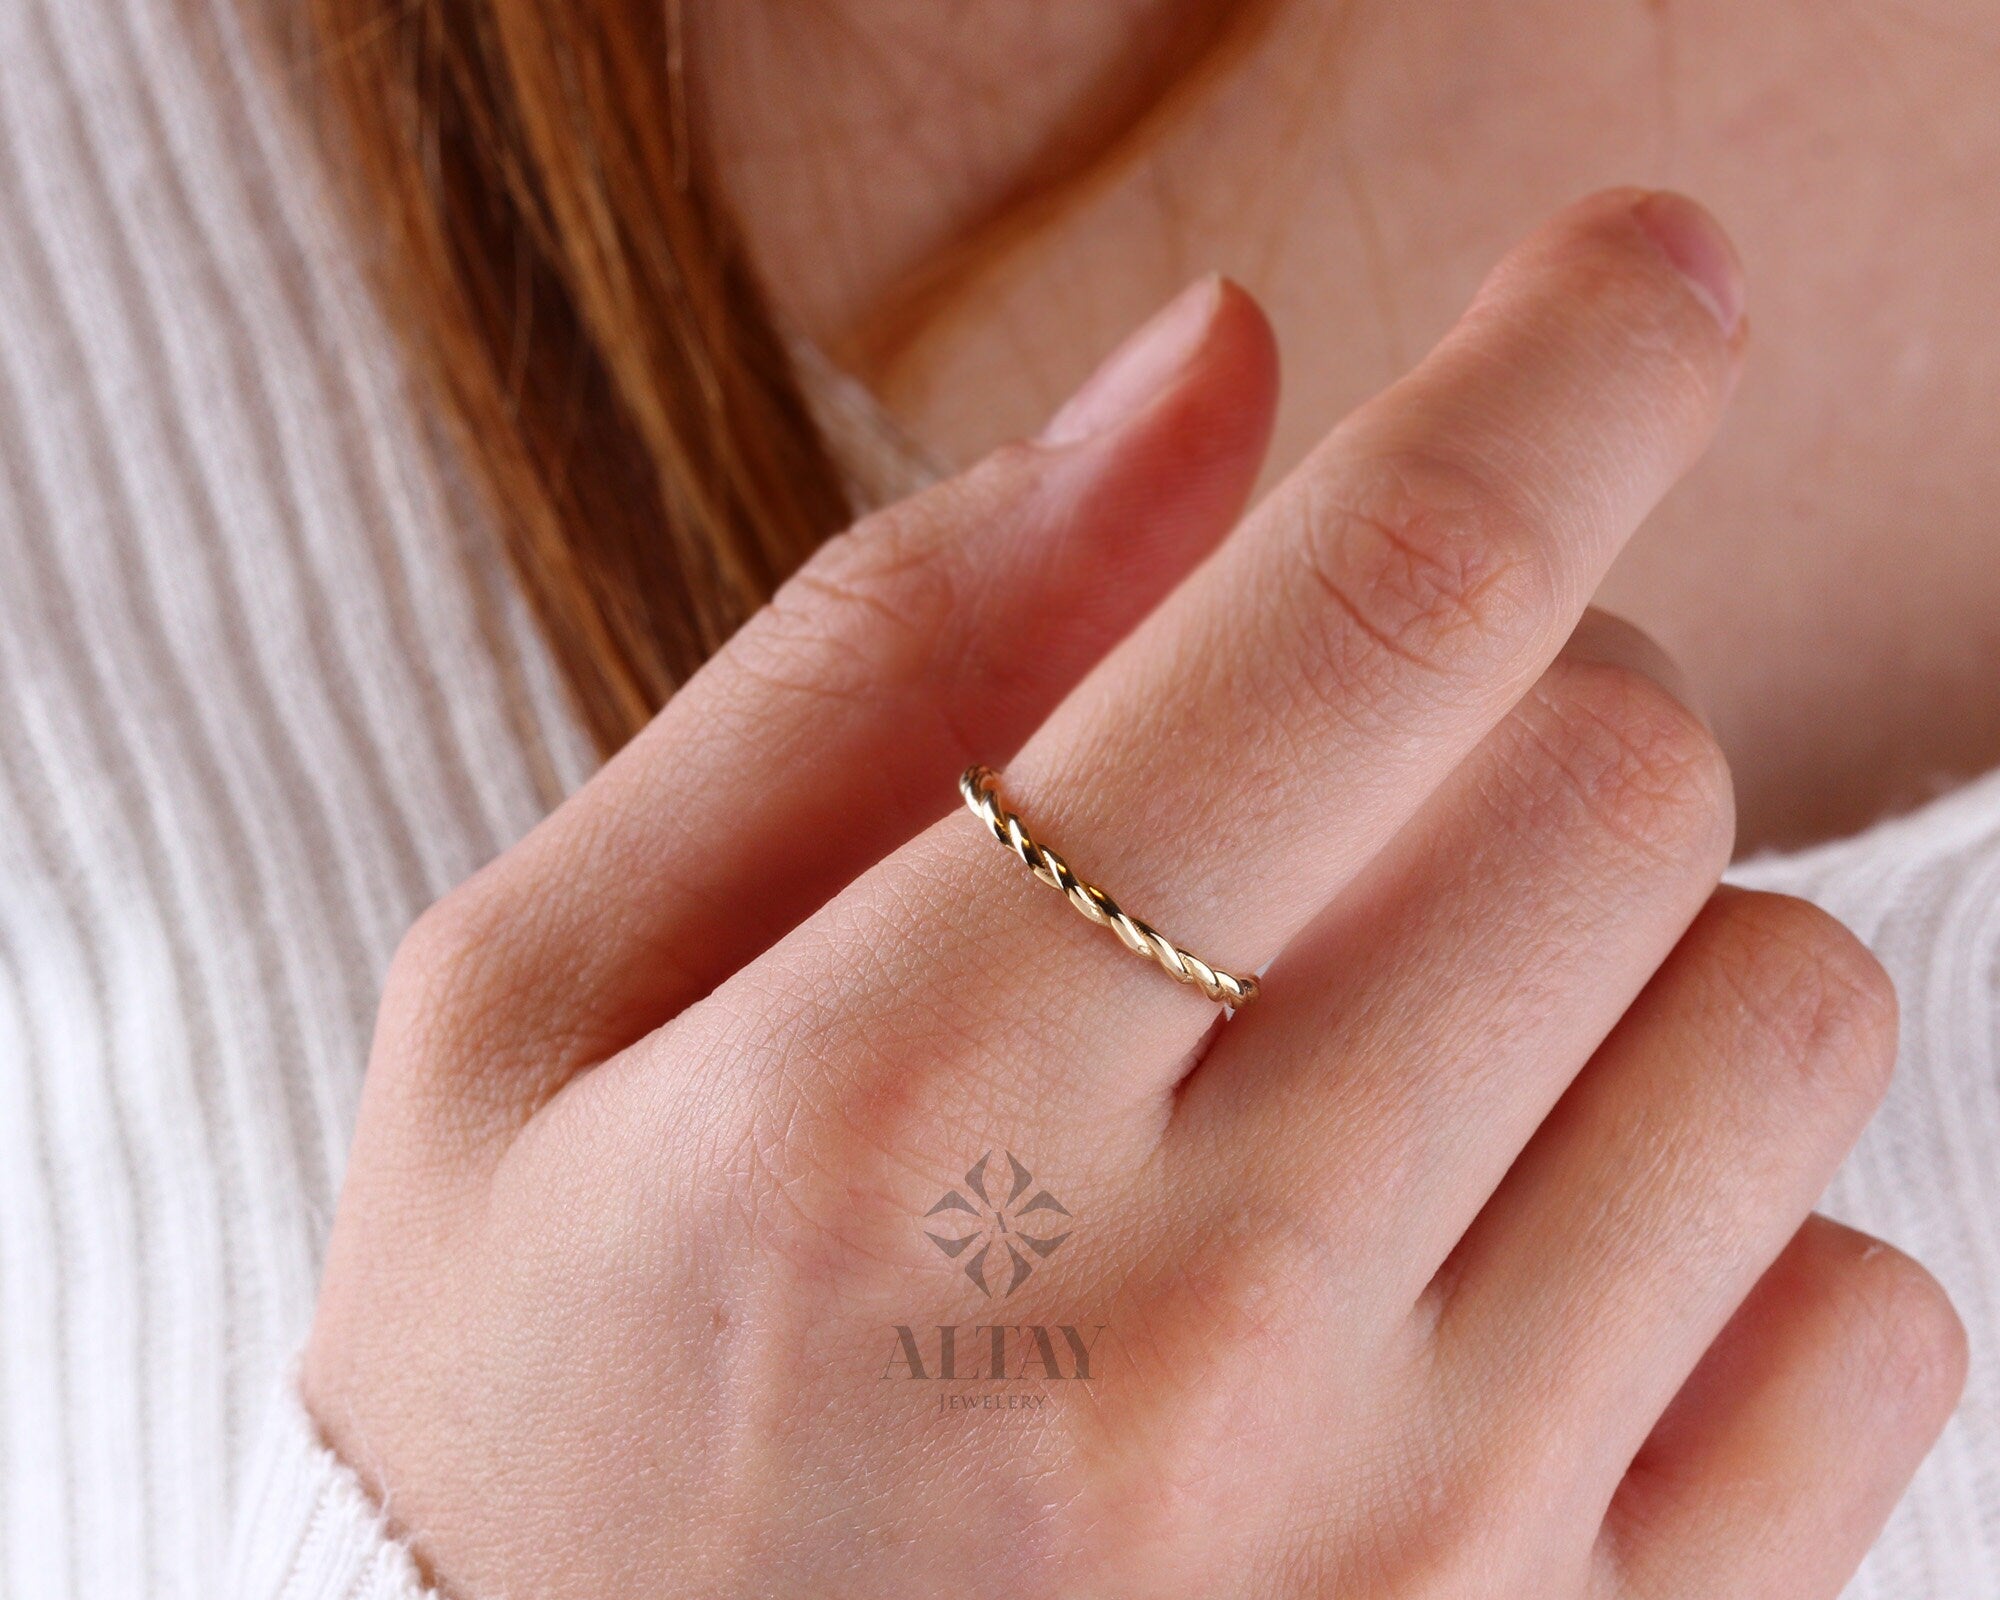 14K Solid Gold Twist Ring, Rope Style Twisted Gold Ring, Dainty Stacking Ring, Simple Delicate Stack Twist Ring, Thin Twist Wedding Band